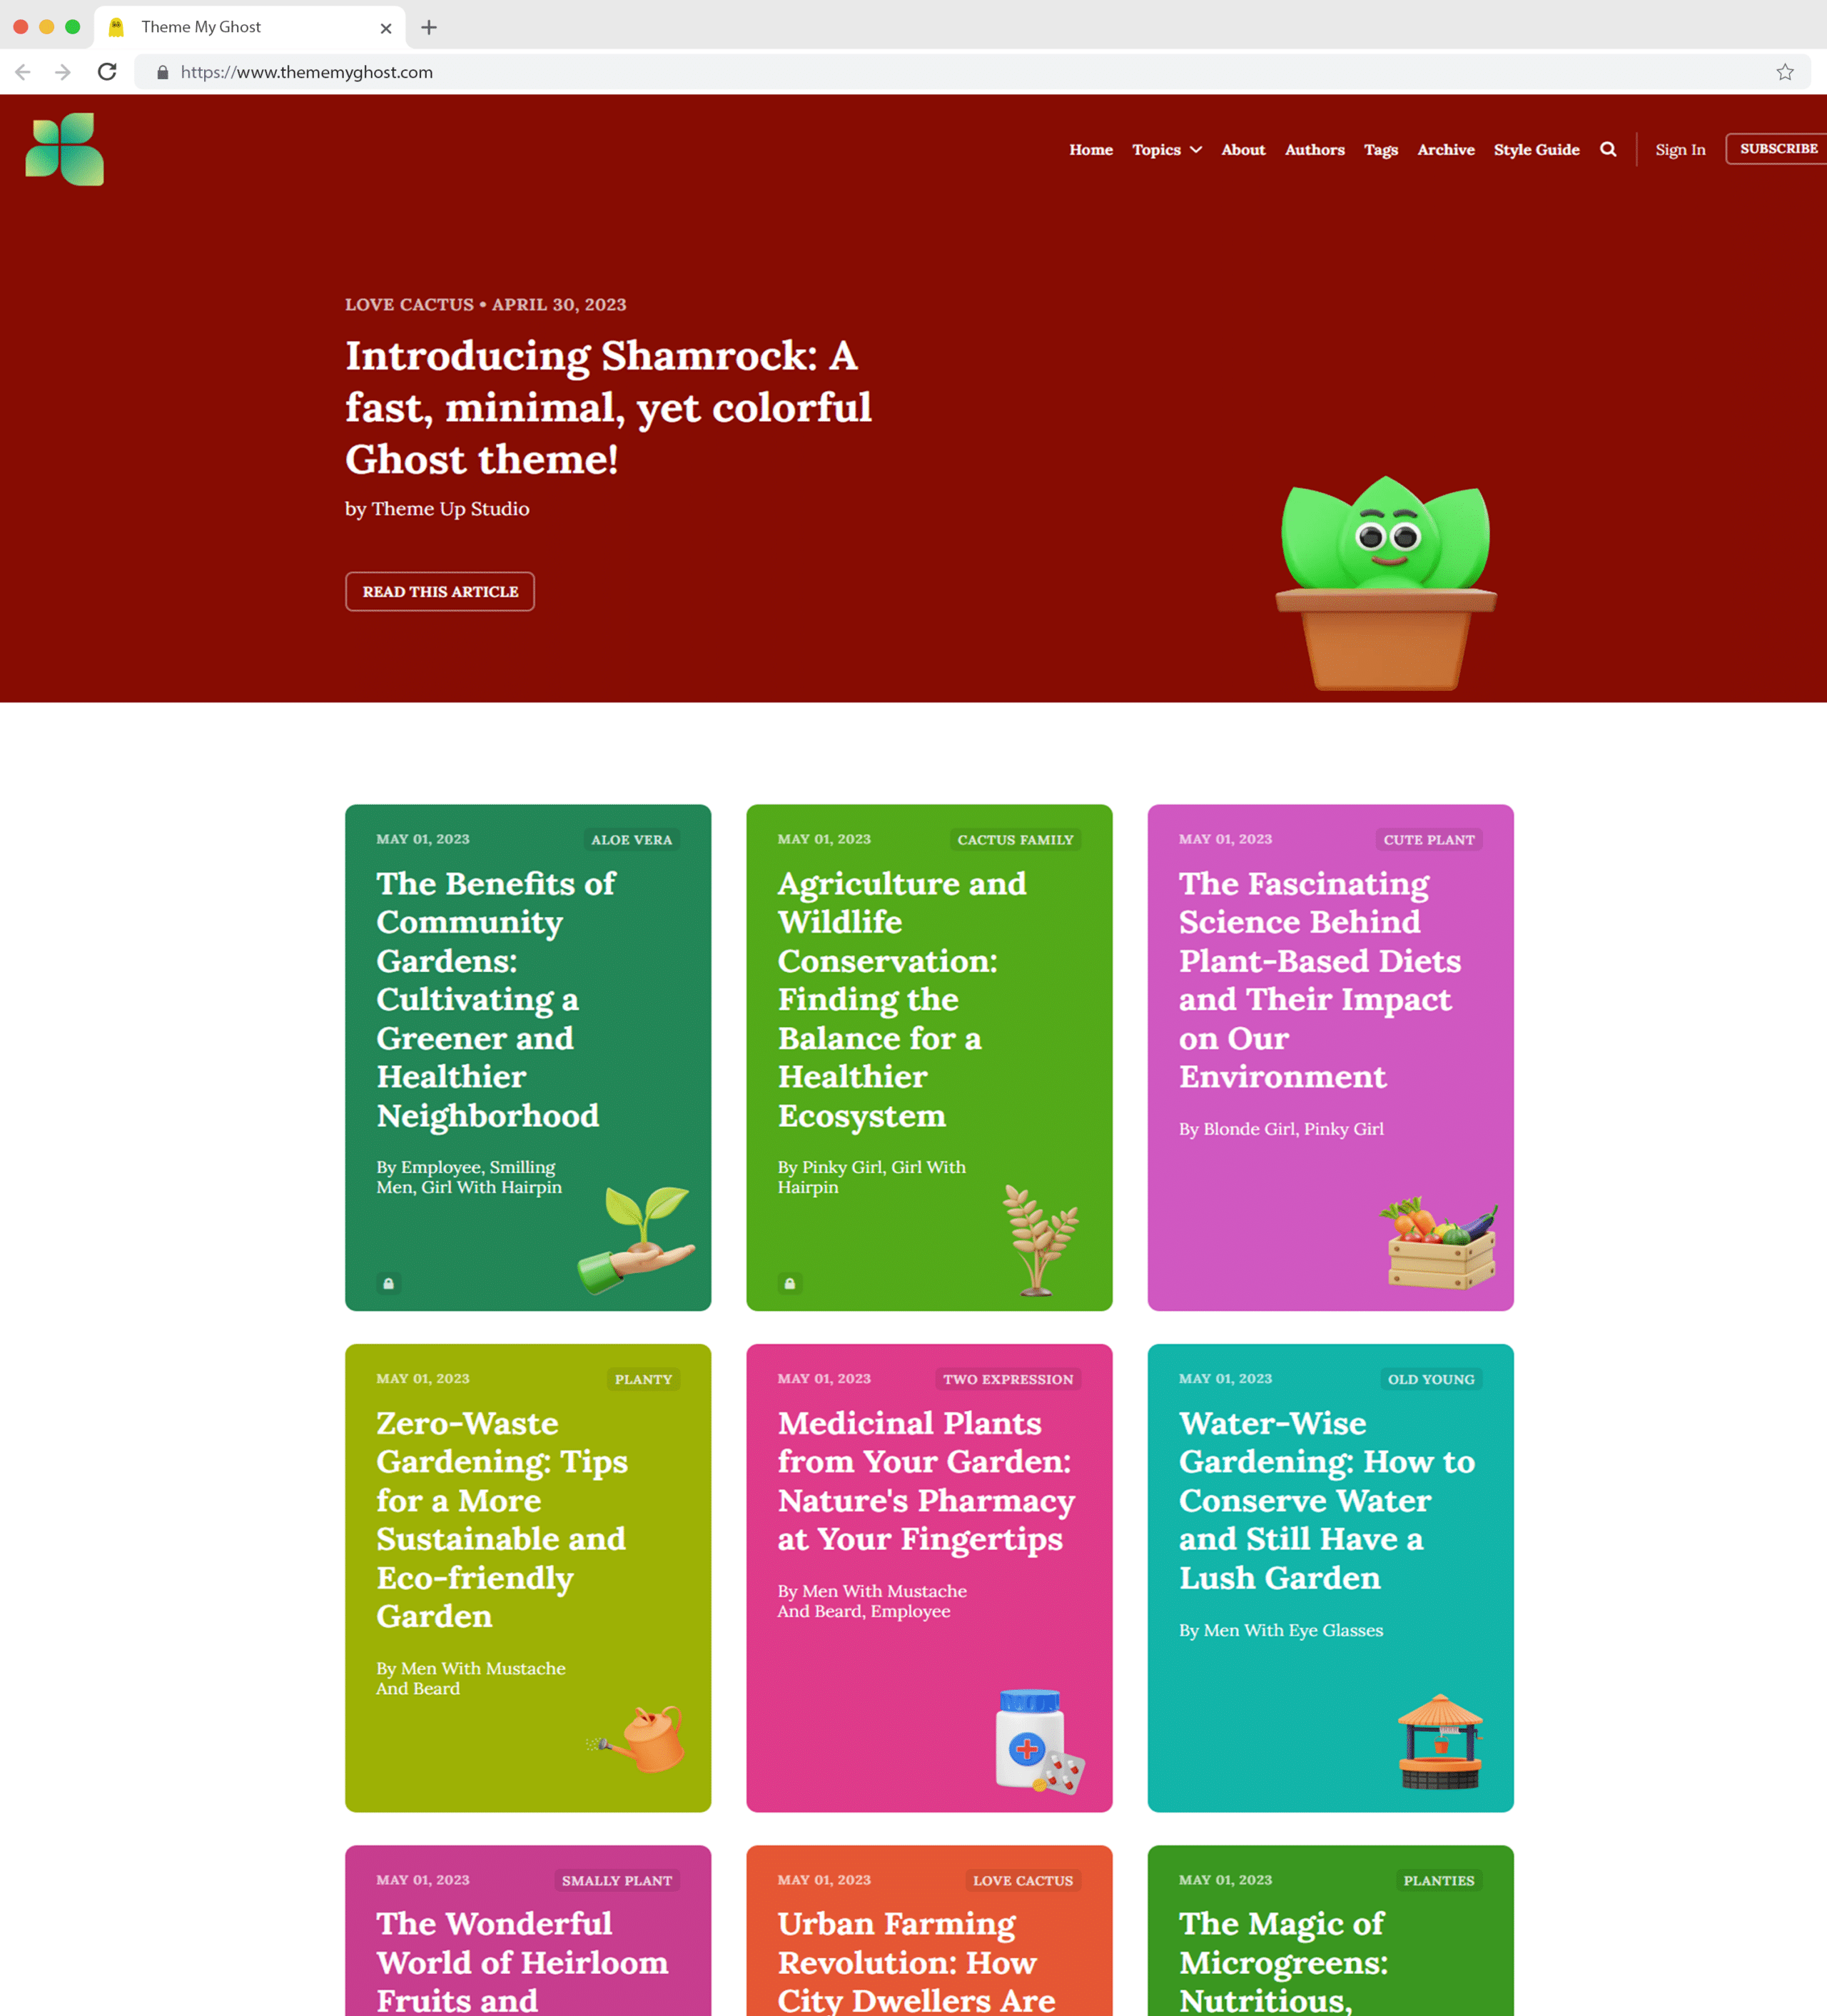 Shamrock is a colorful fast and minimalistic Ghost theme with lists and grid layout and archive tags and authors page